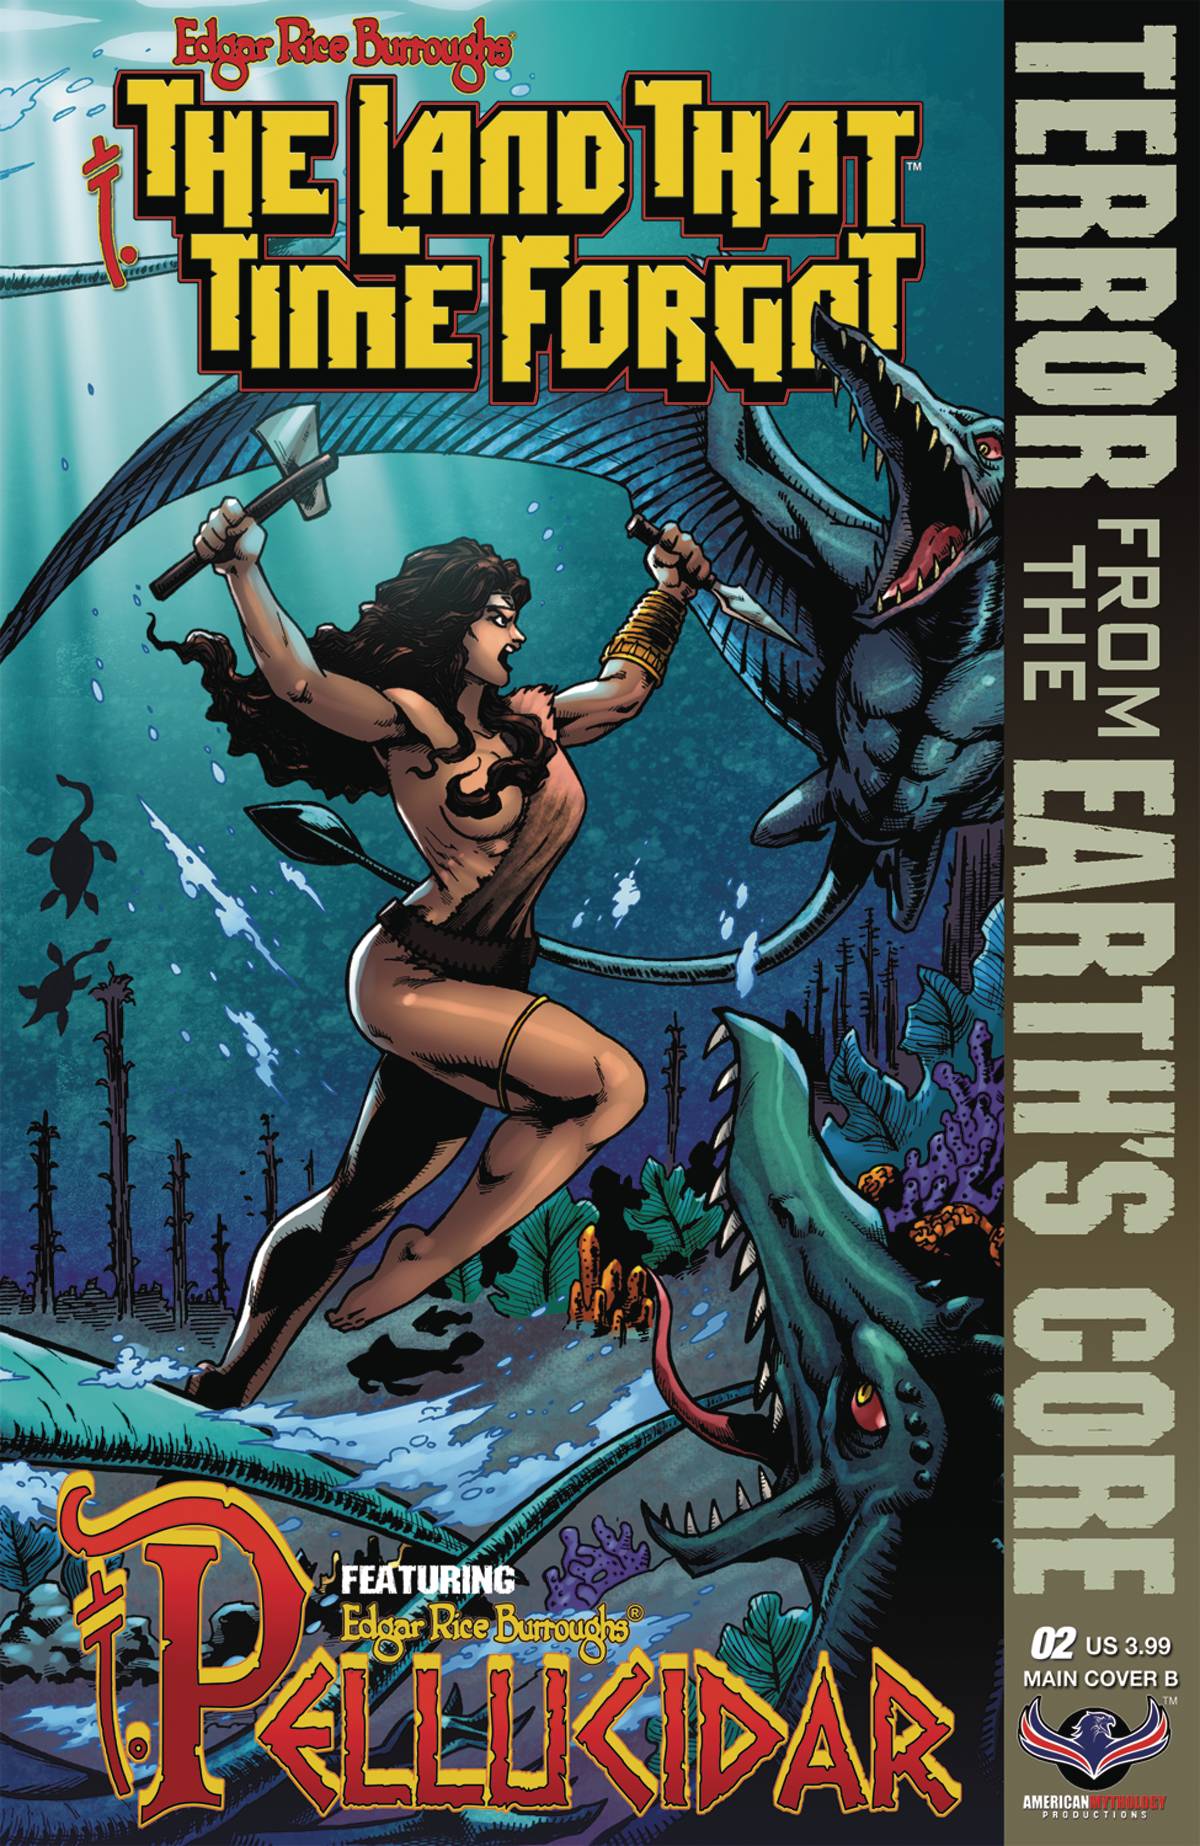 LAND THAT TIME FORGOT: TERROR FROM THE EARTH'S CORE#2